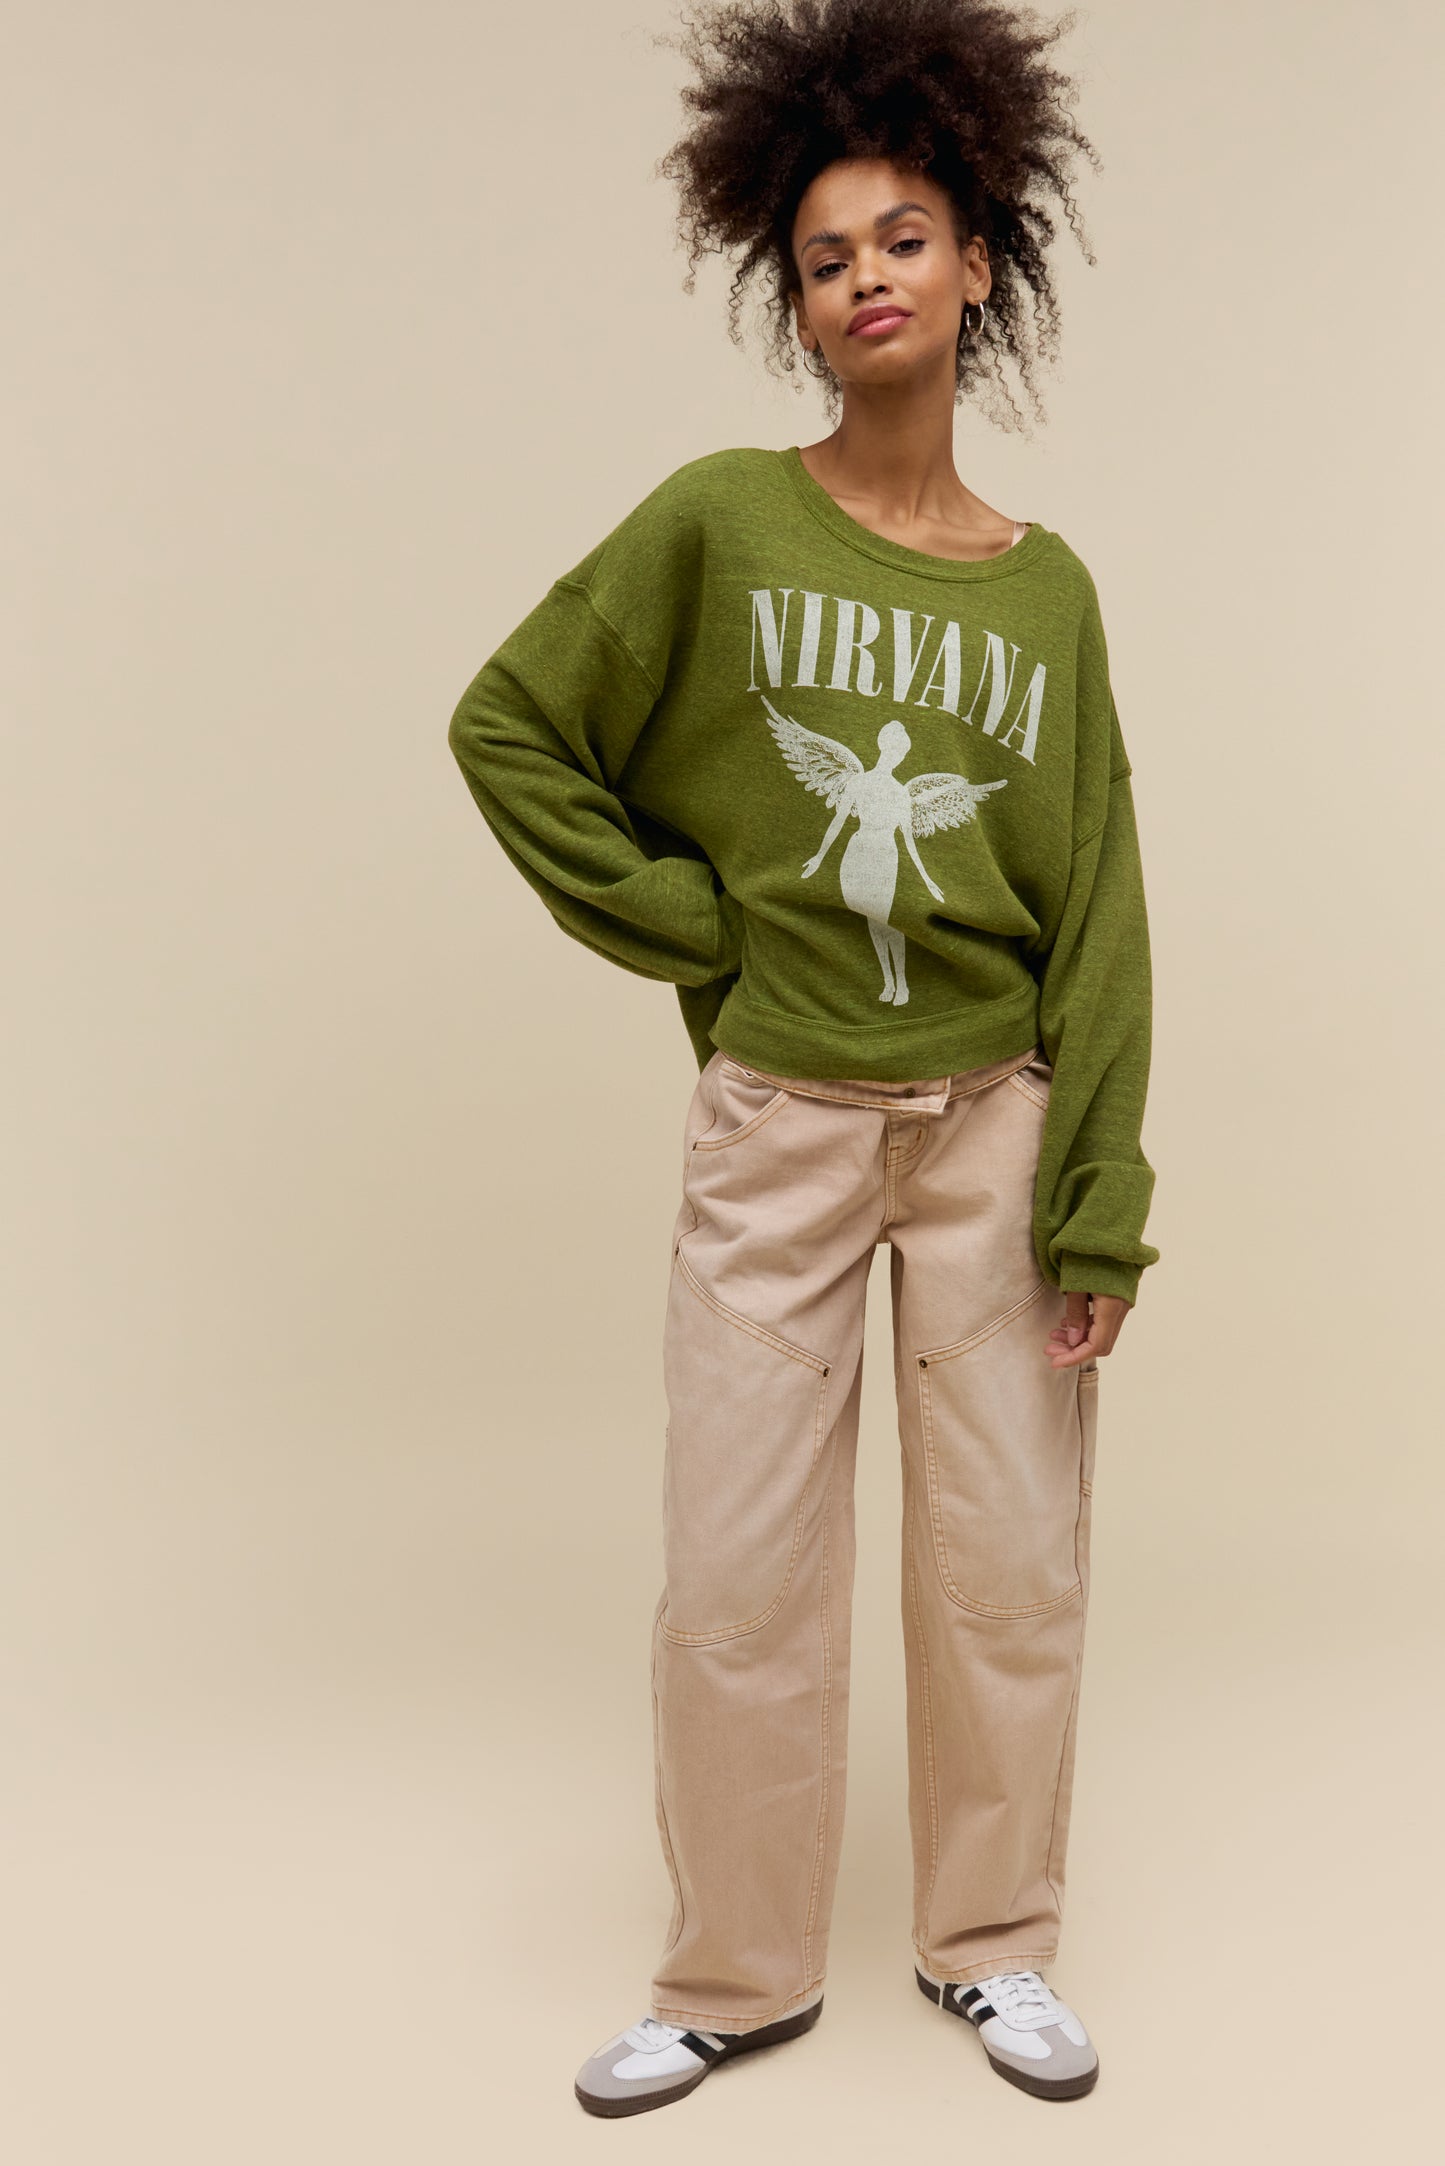 Model wearing a heather green oversized tri-blend fleece sweatshirt with Nirvana 'In Utero' graphics on the front and back